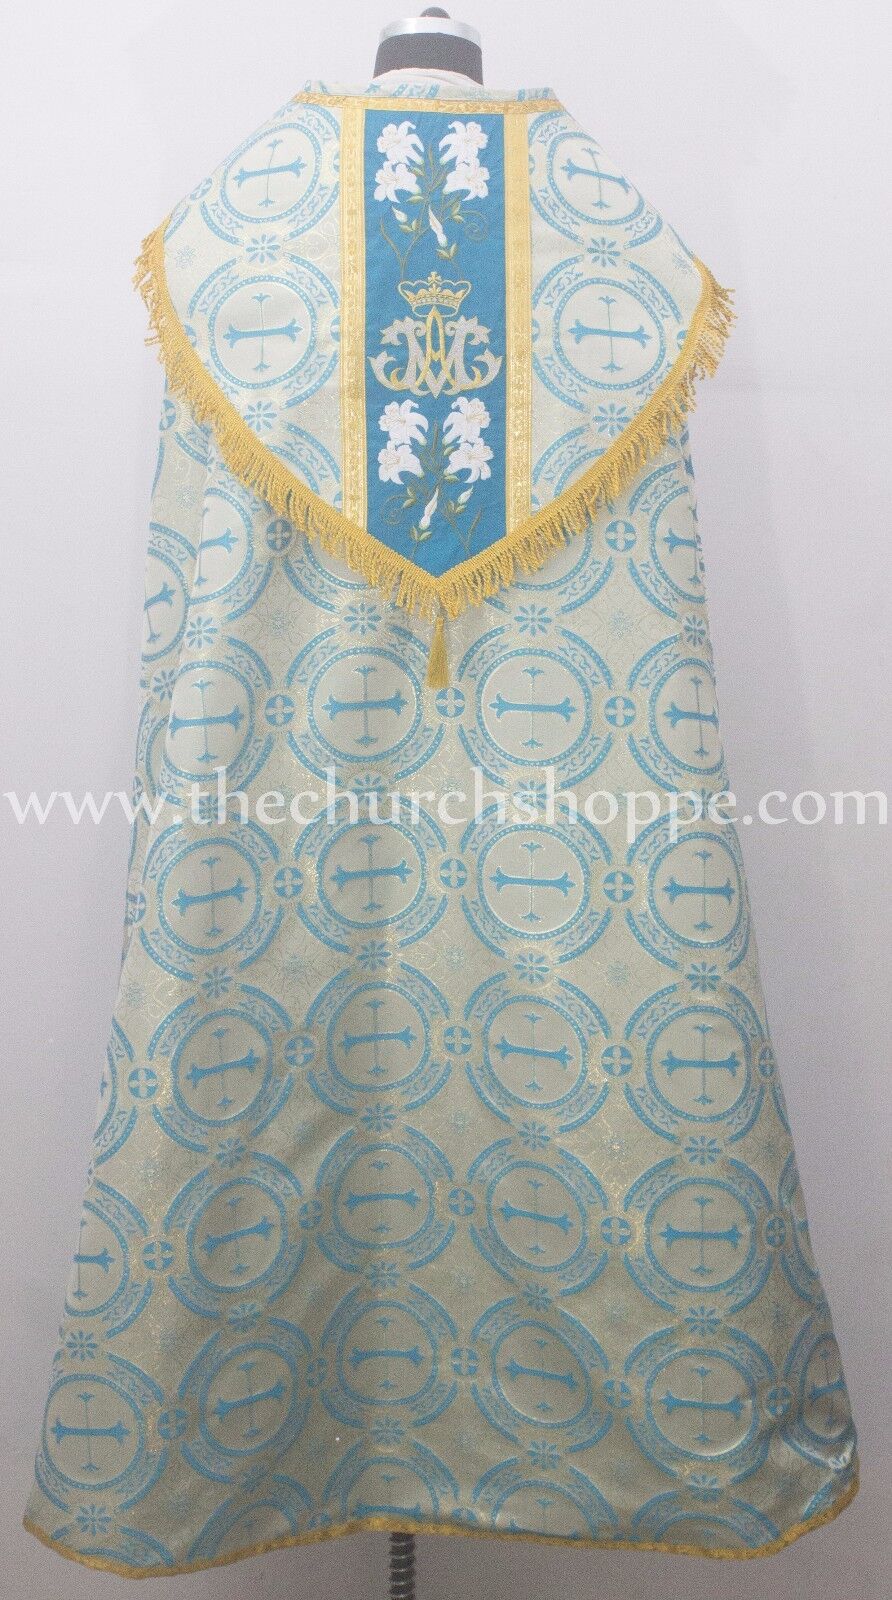 NEW Metallic Marian Blue Gold Cope & Stole Set with AM embroidery,capa pluvial